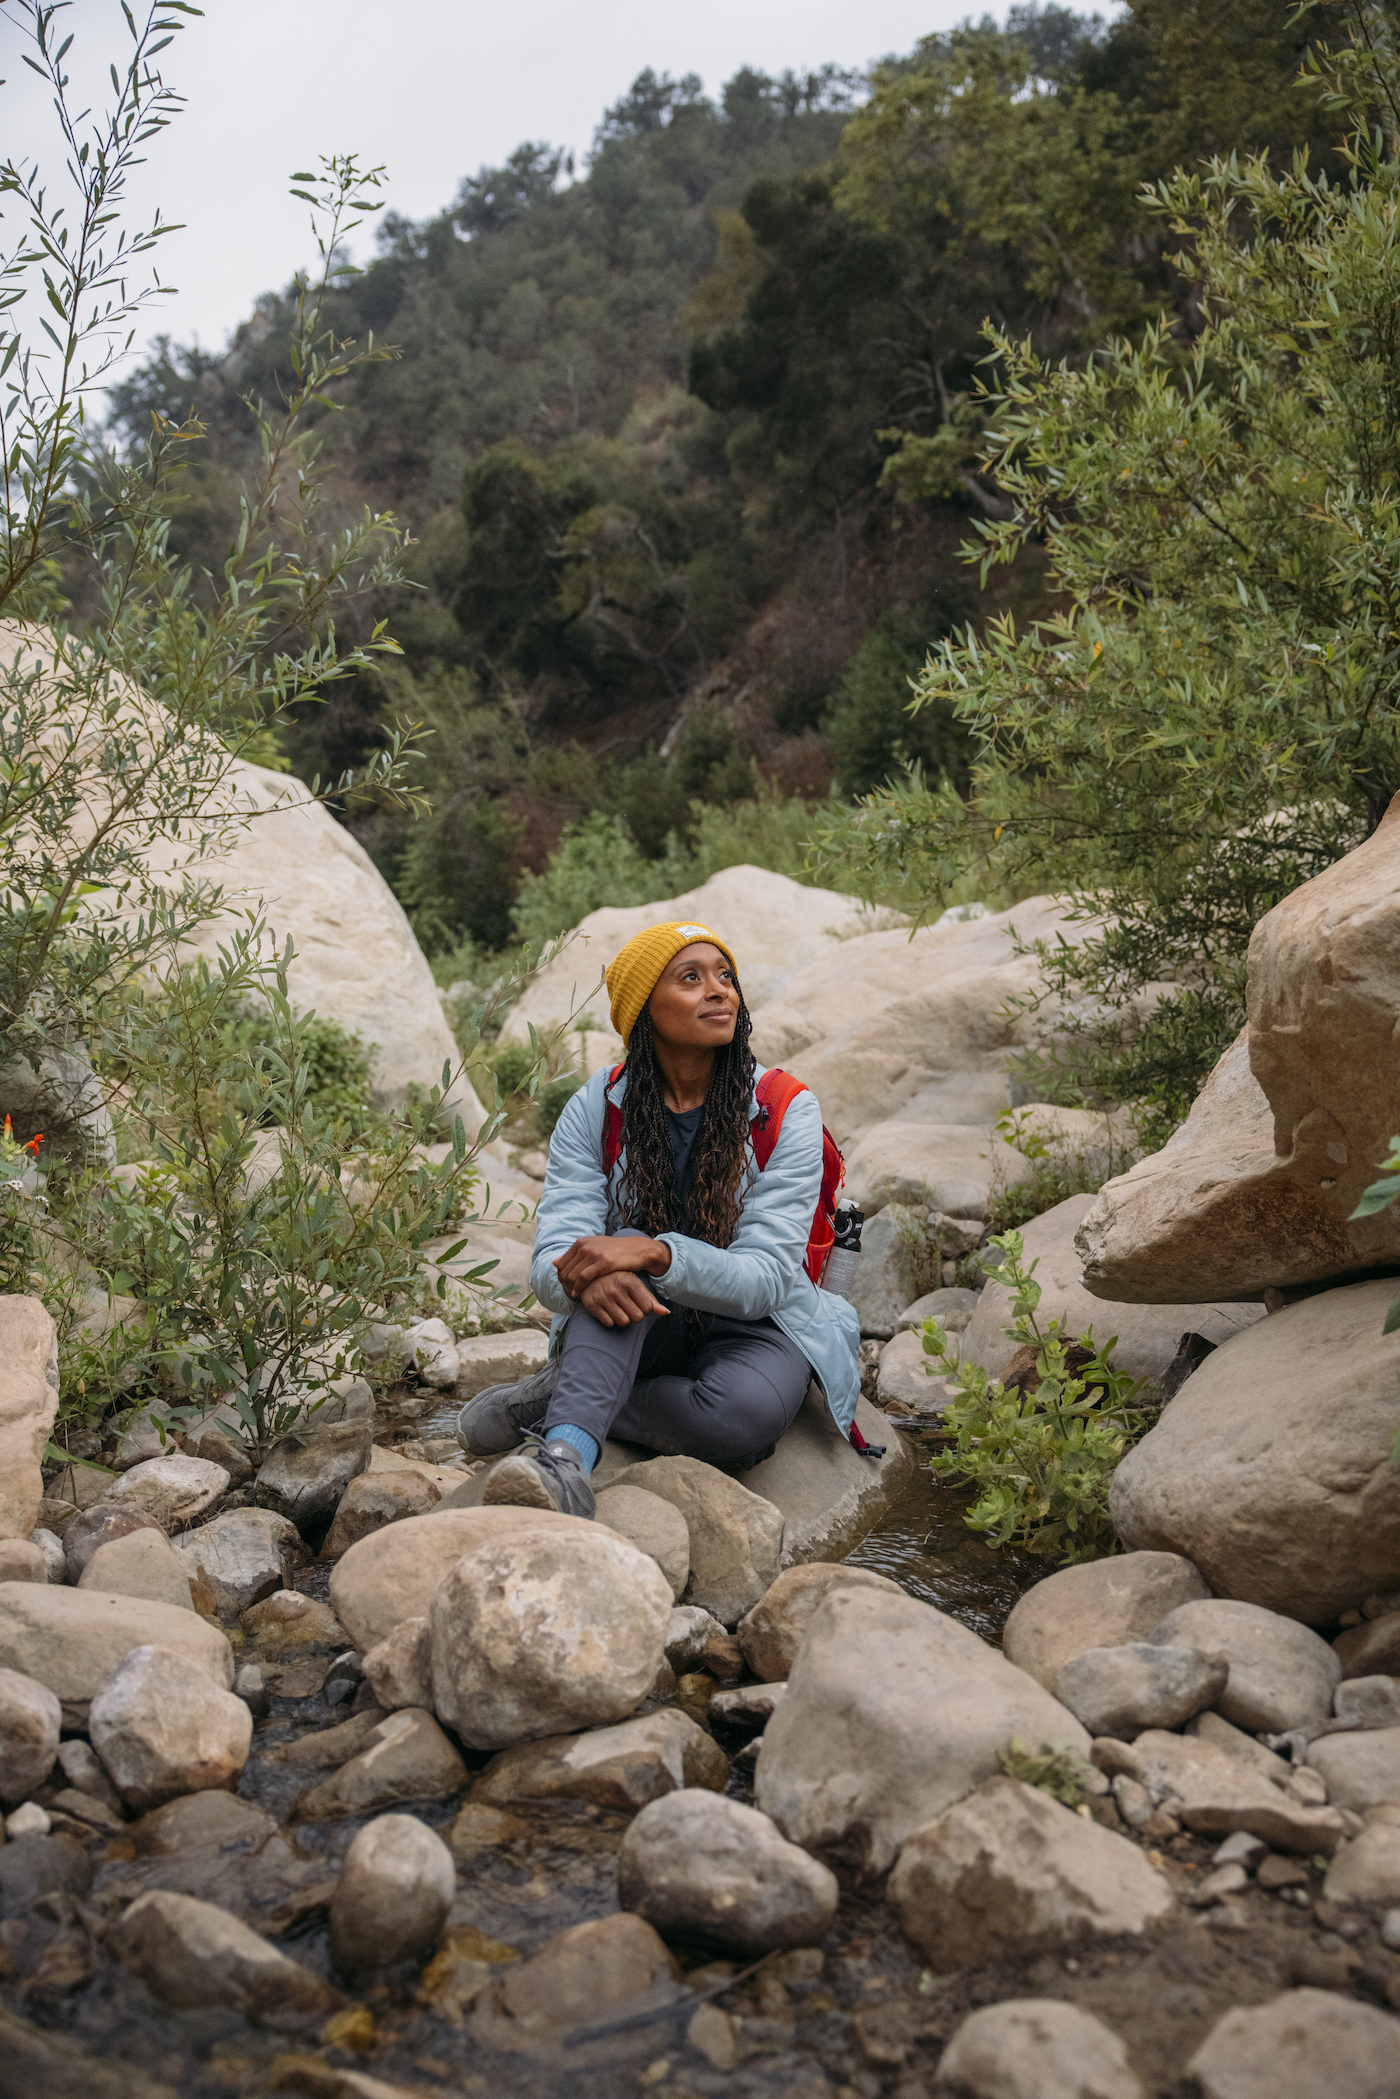 A Black woman wearing a beanie sits amidst rocks in a natural outdoor setting. She looks up at the sky with a gentle smile.